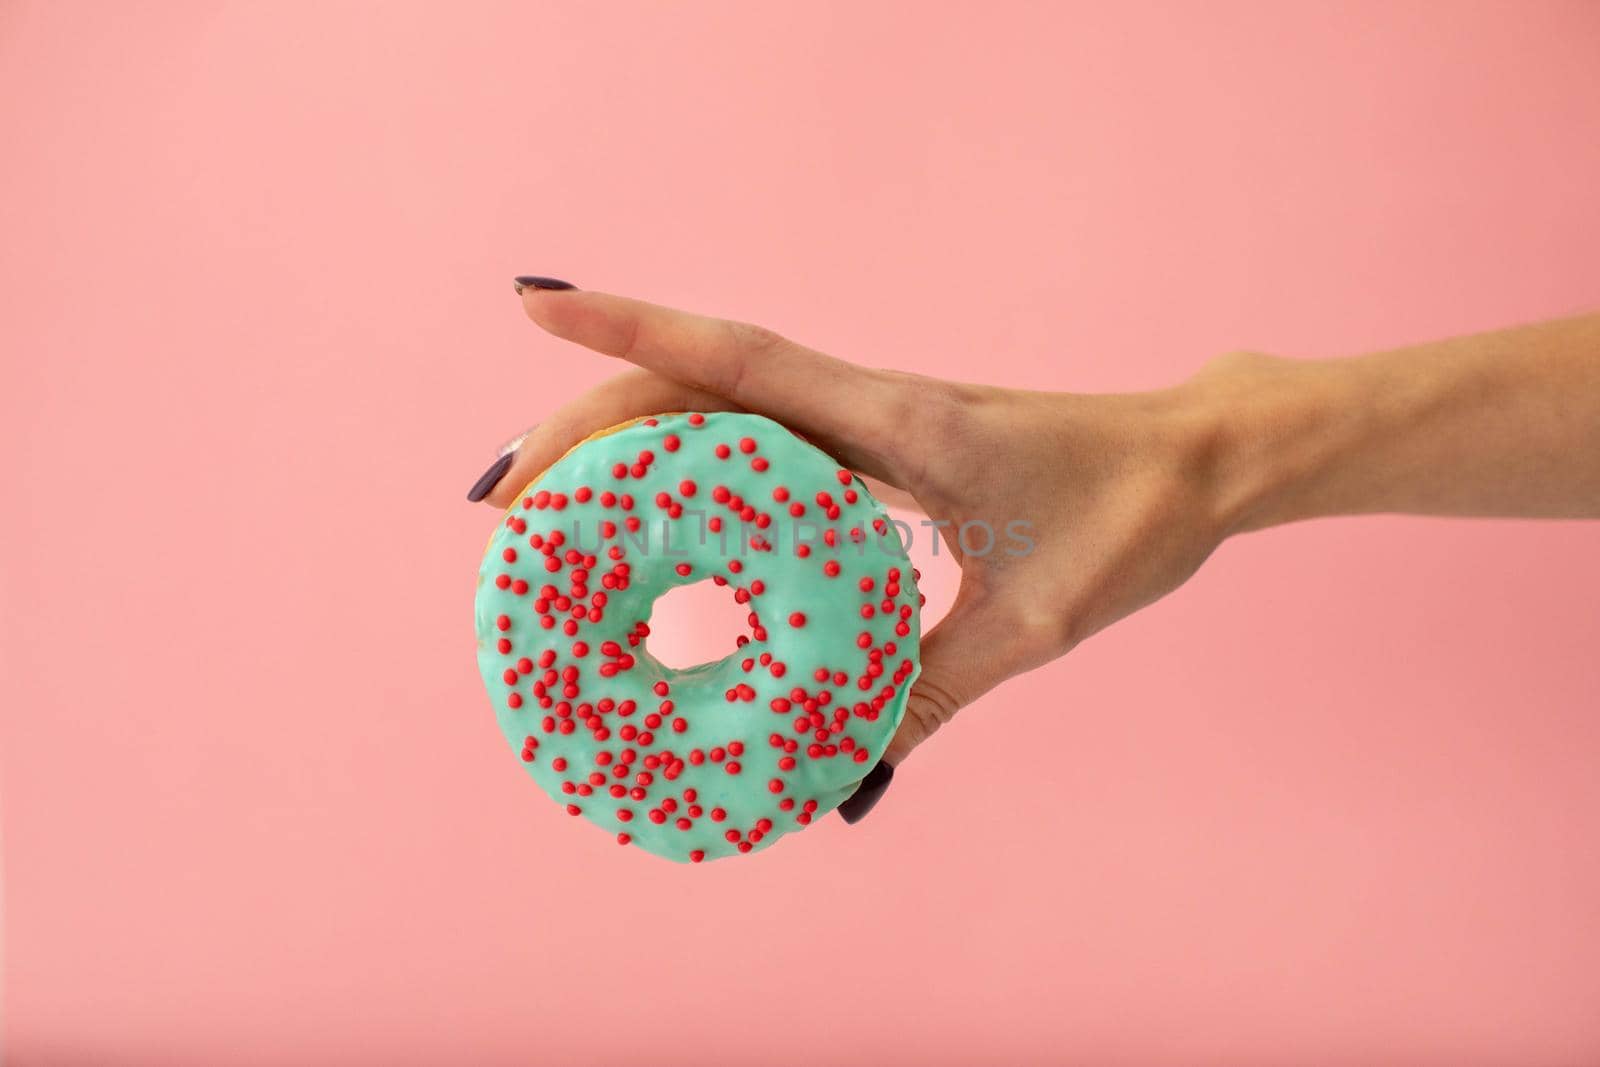 Hand with donut on pink background by Demkat